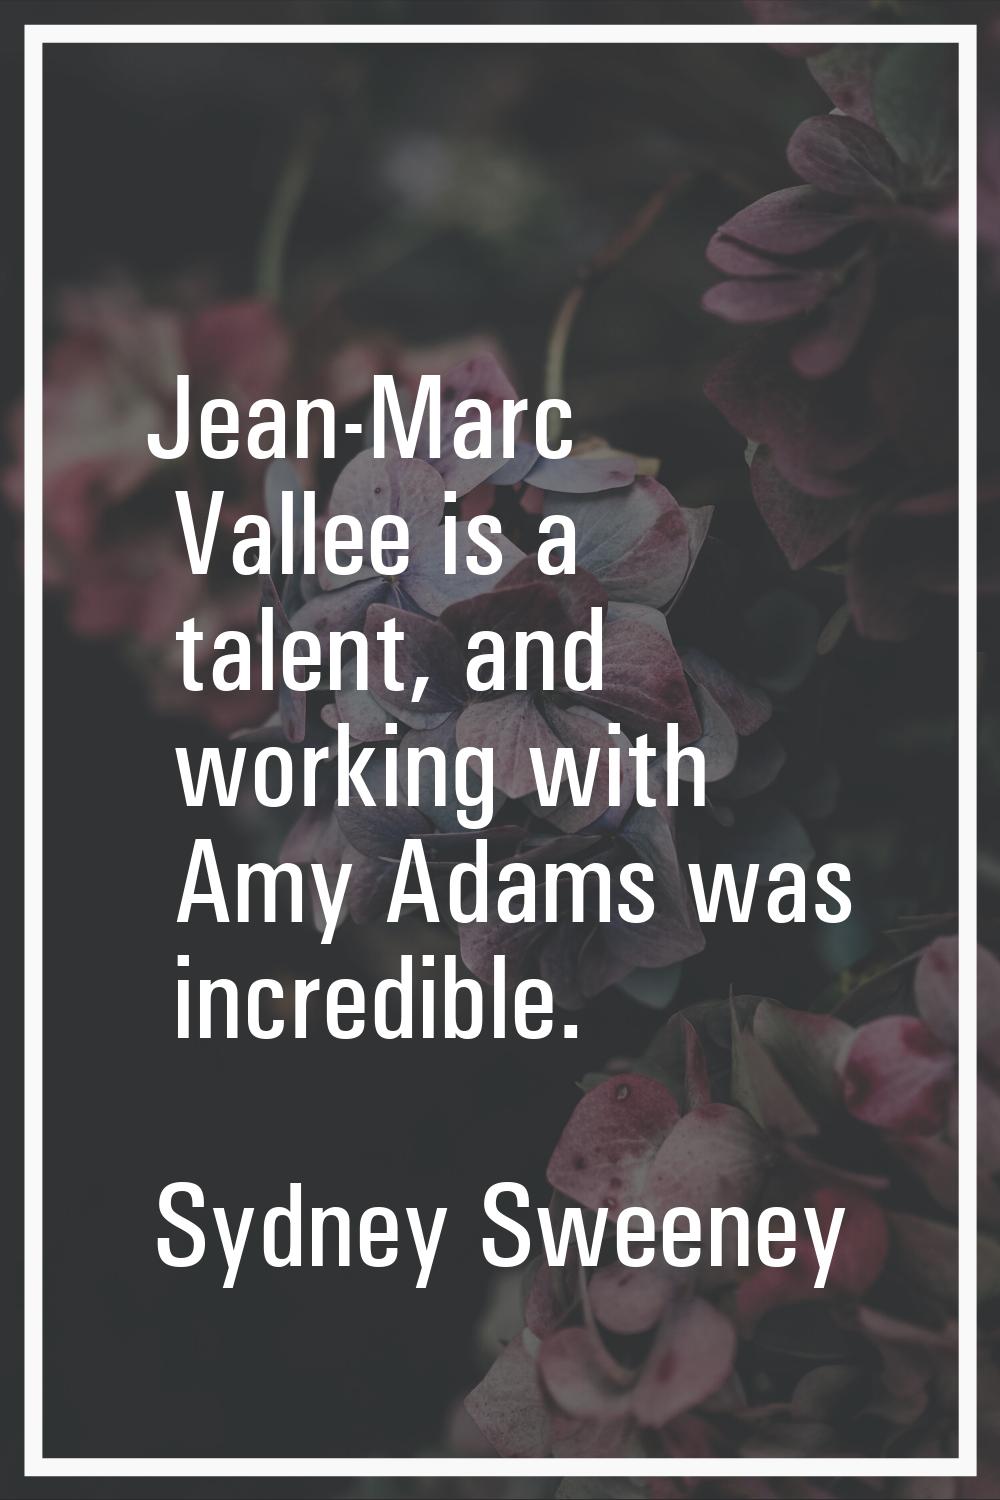 Jean-Marc Vallee is a talent, and working with Amy Adams was incredible.